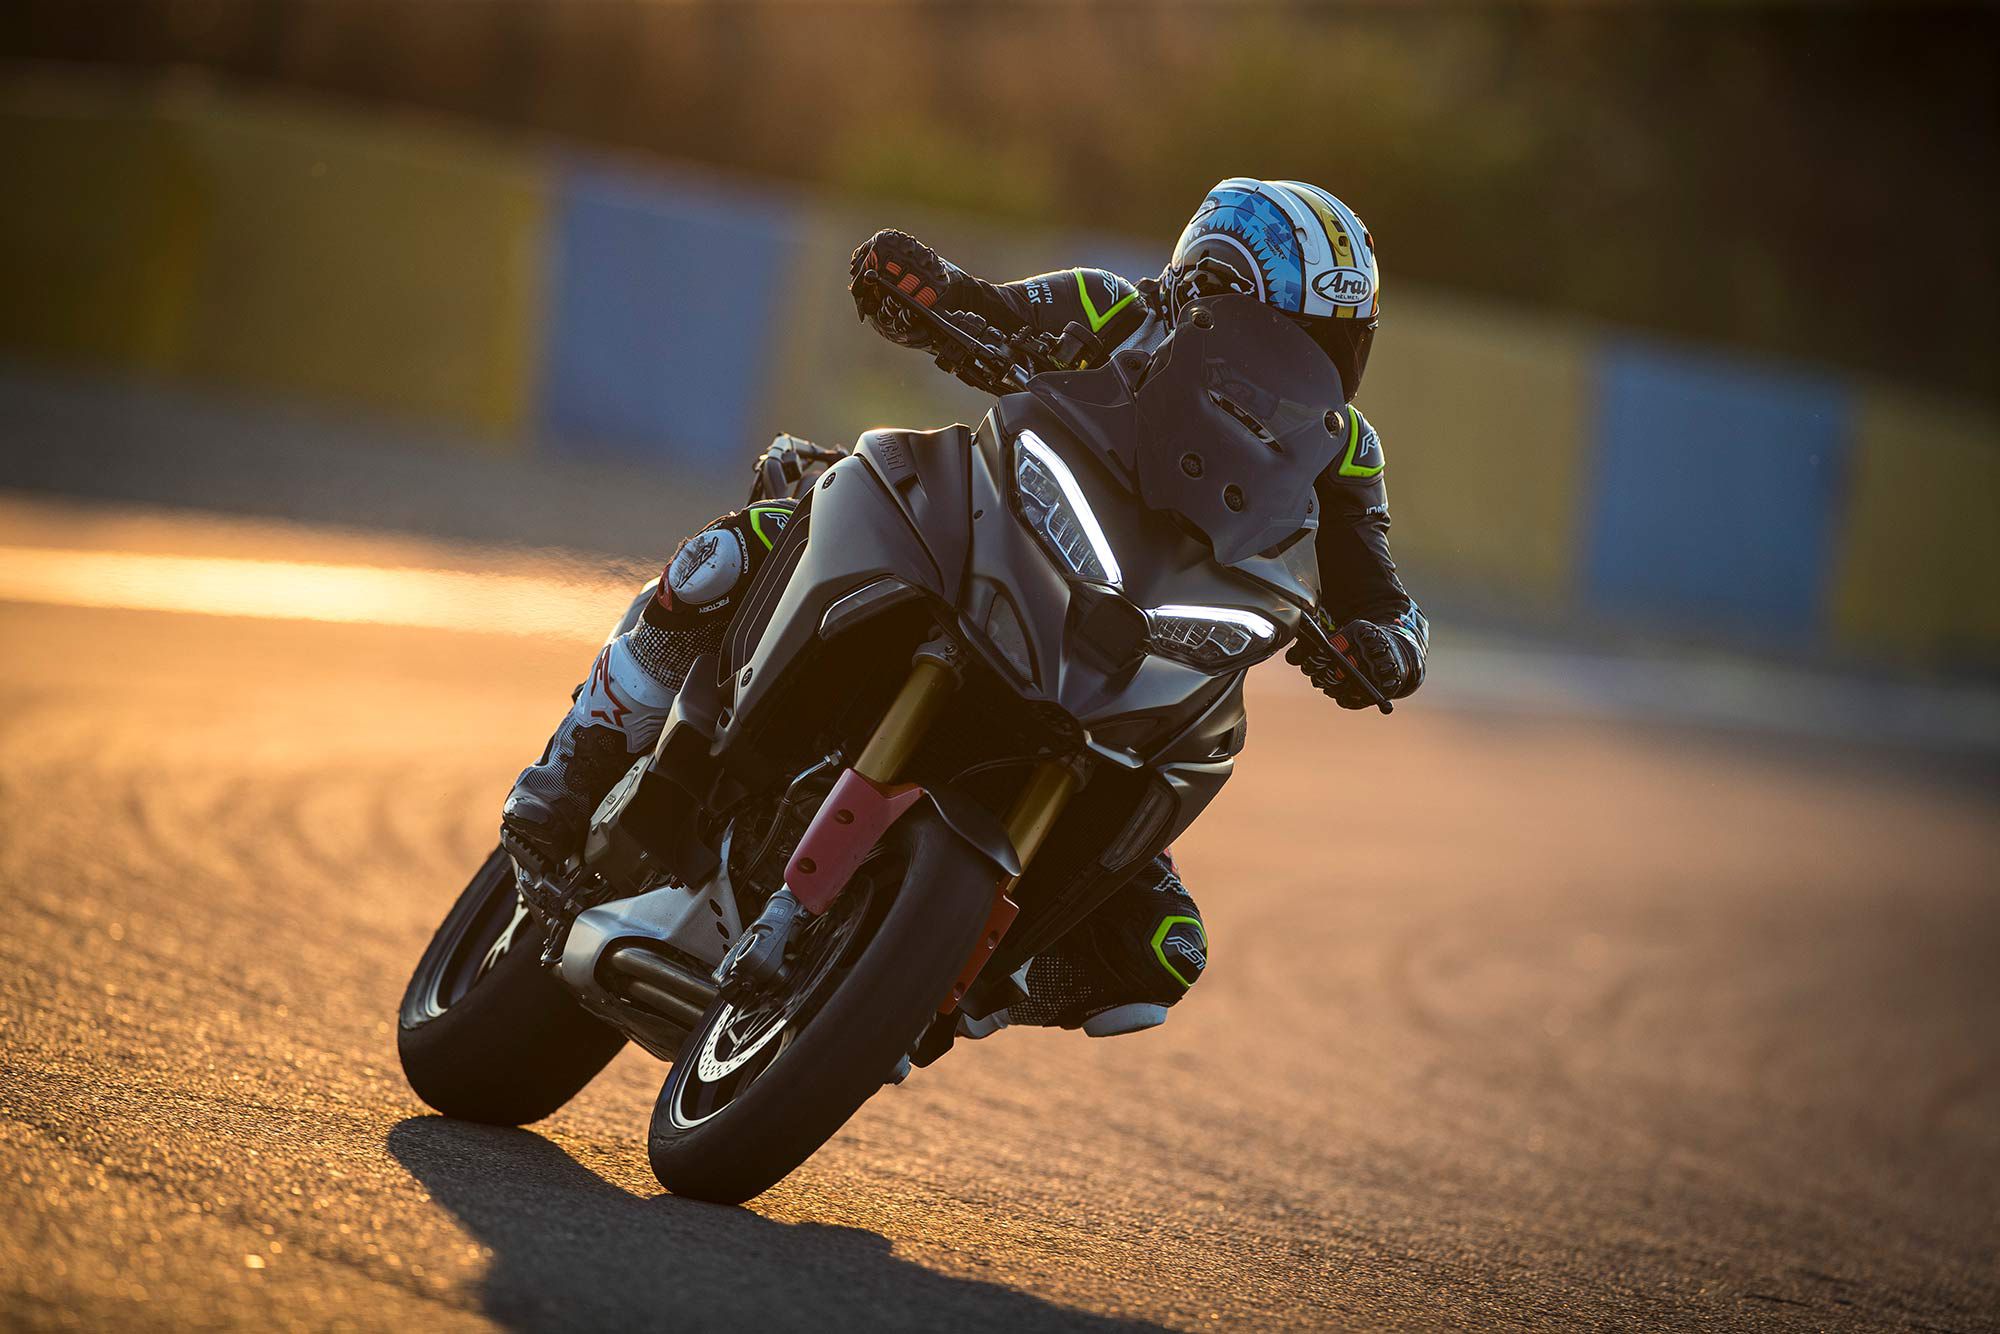 Rider aids will be completely new, with new settings and algorithms to match the new chassis and shorter-travel suspension.